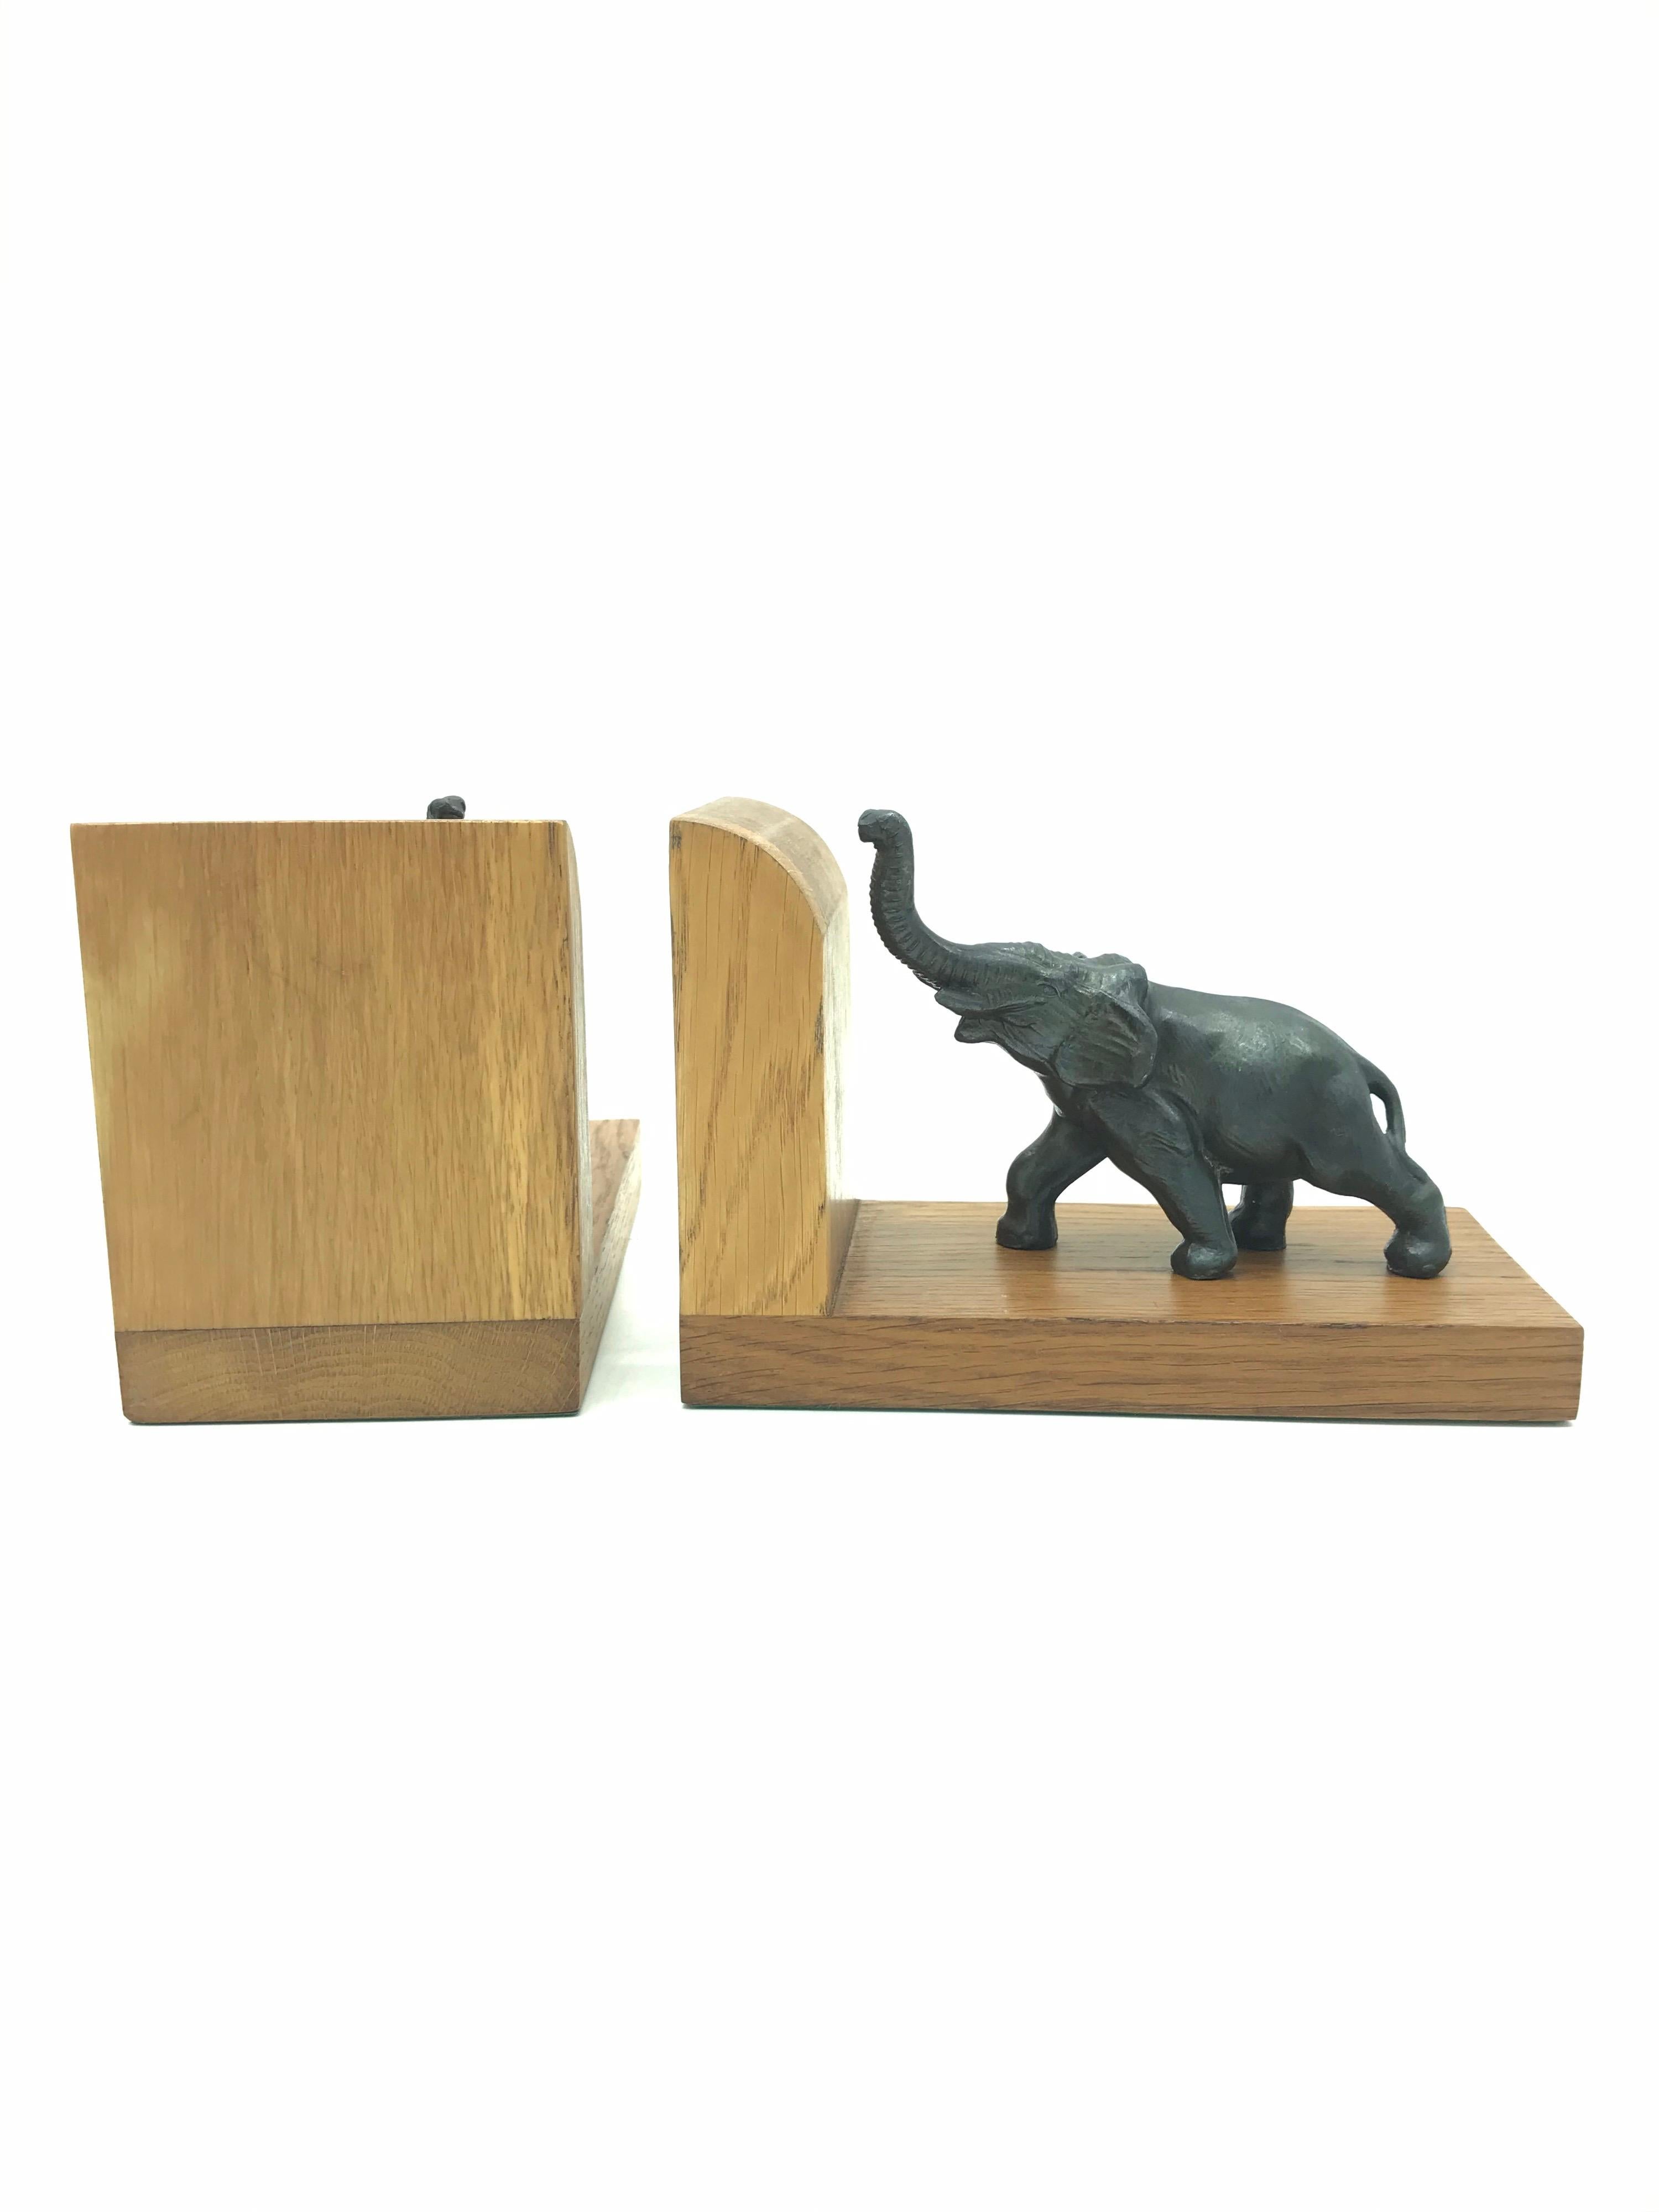 Mid-20th Century Amazing Pair of Art Deco Elephant Book Ends from the 1930s